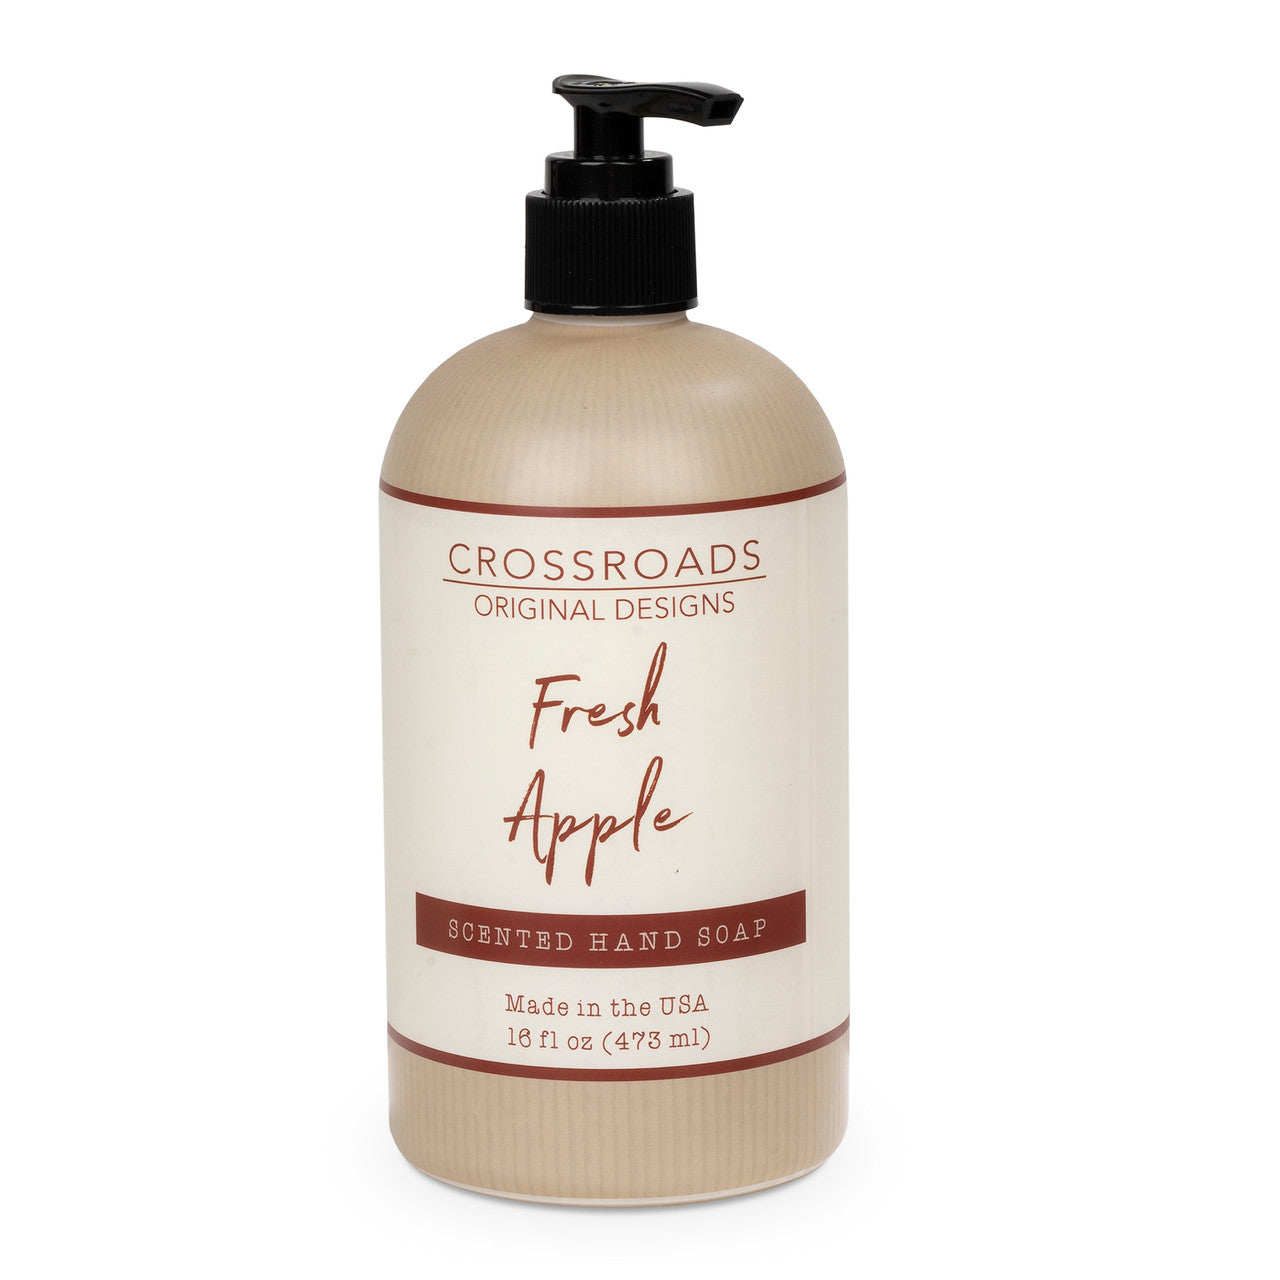 Fresh Apple - 16 oz. Scented Hand Soap